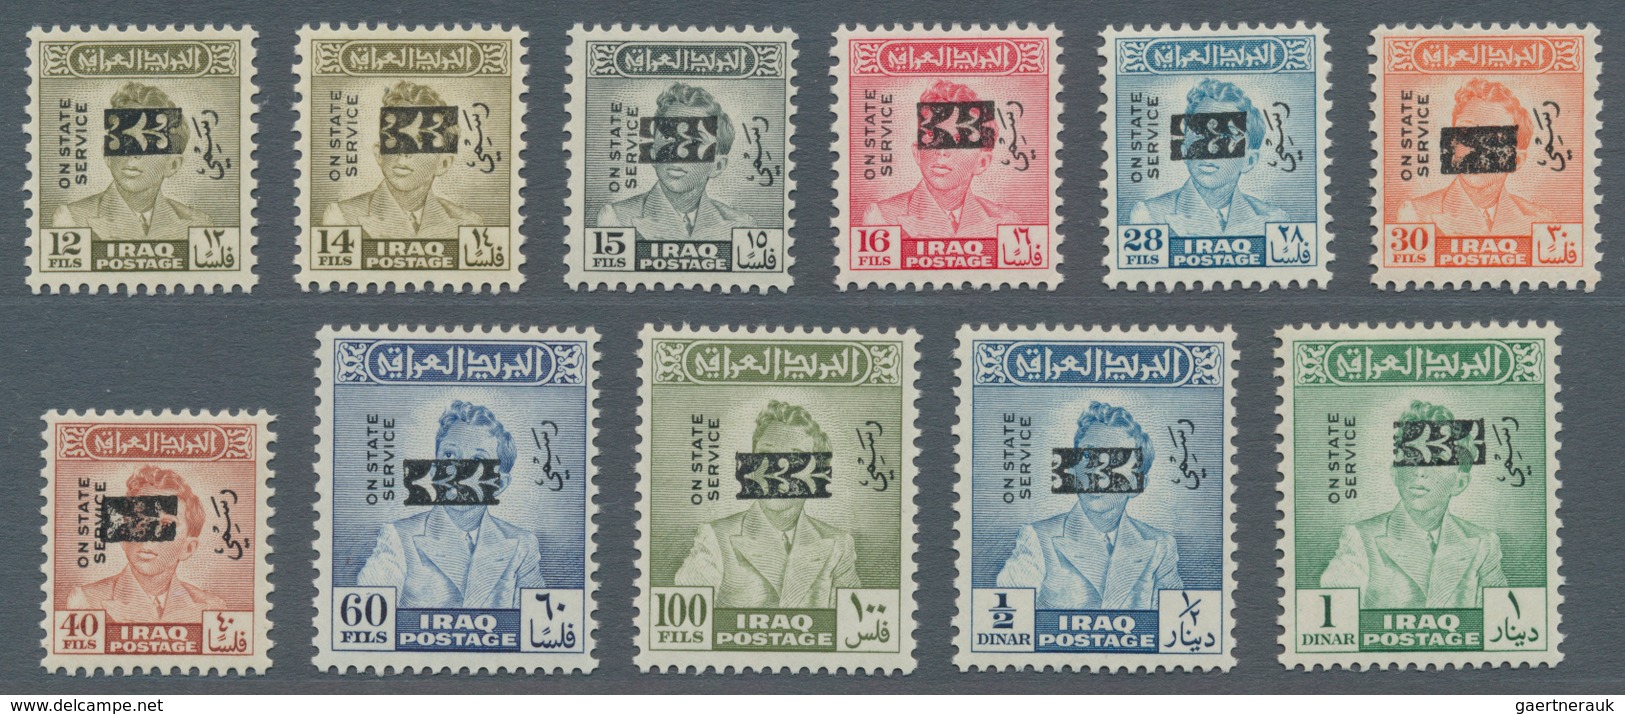 Irak - Dienstmarken: 1973 "Faisal" Official Stamps (1948-51 Issue) With Portrait Obliterated By "lea - Irak